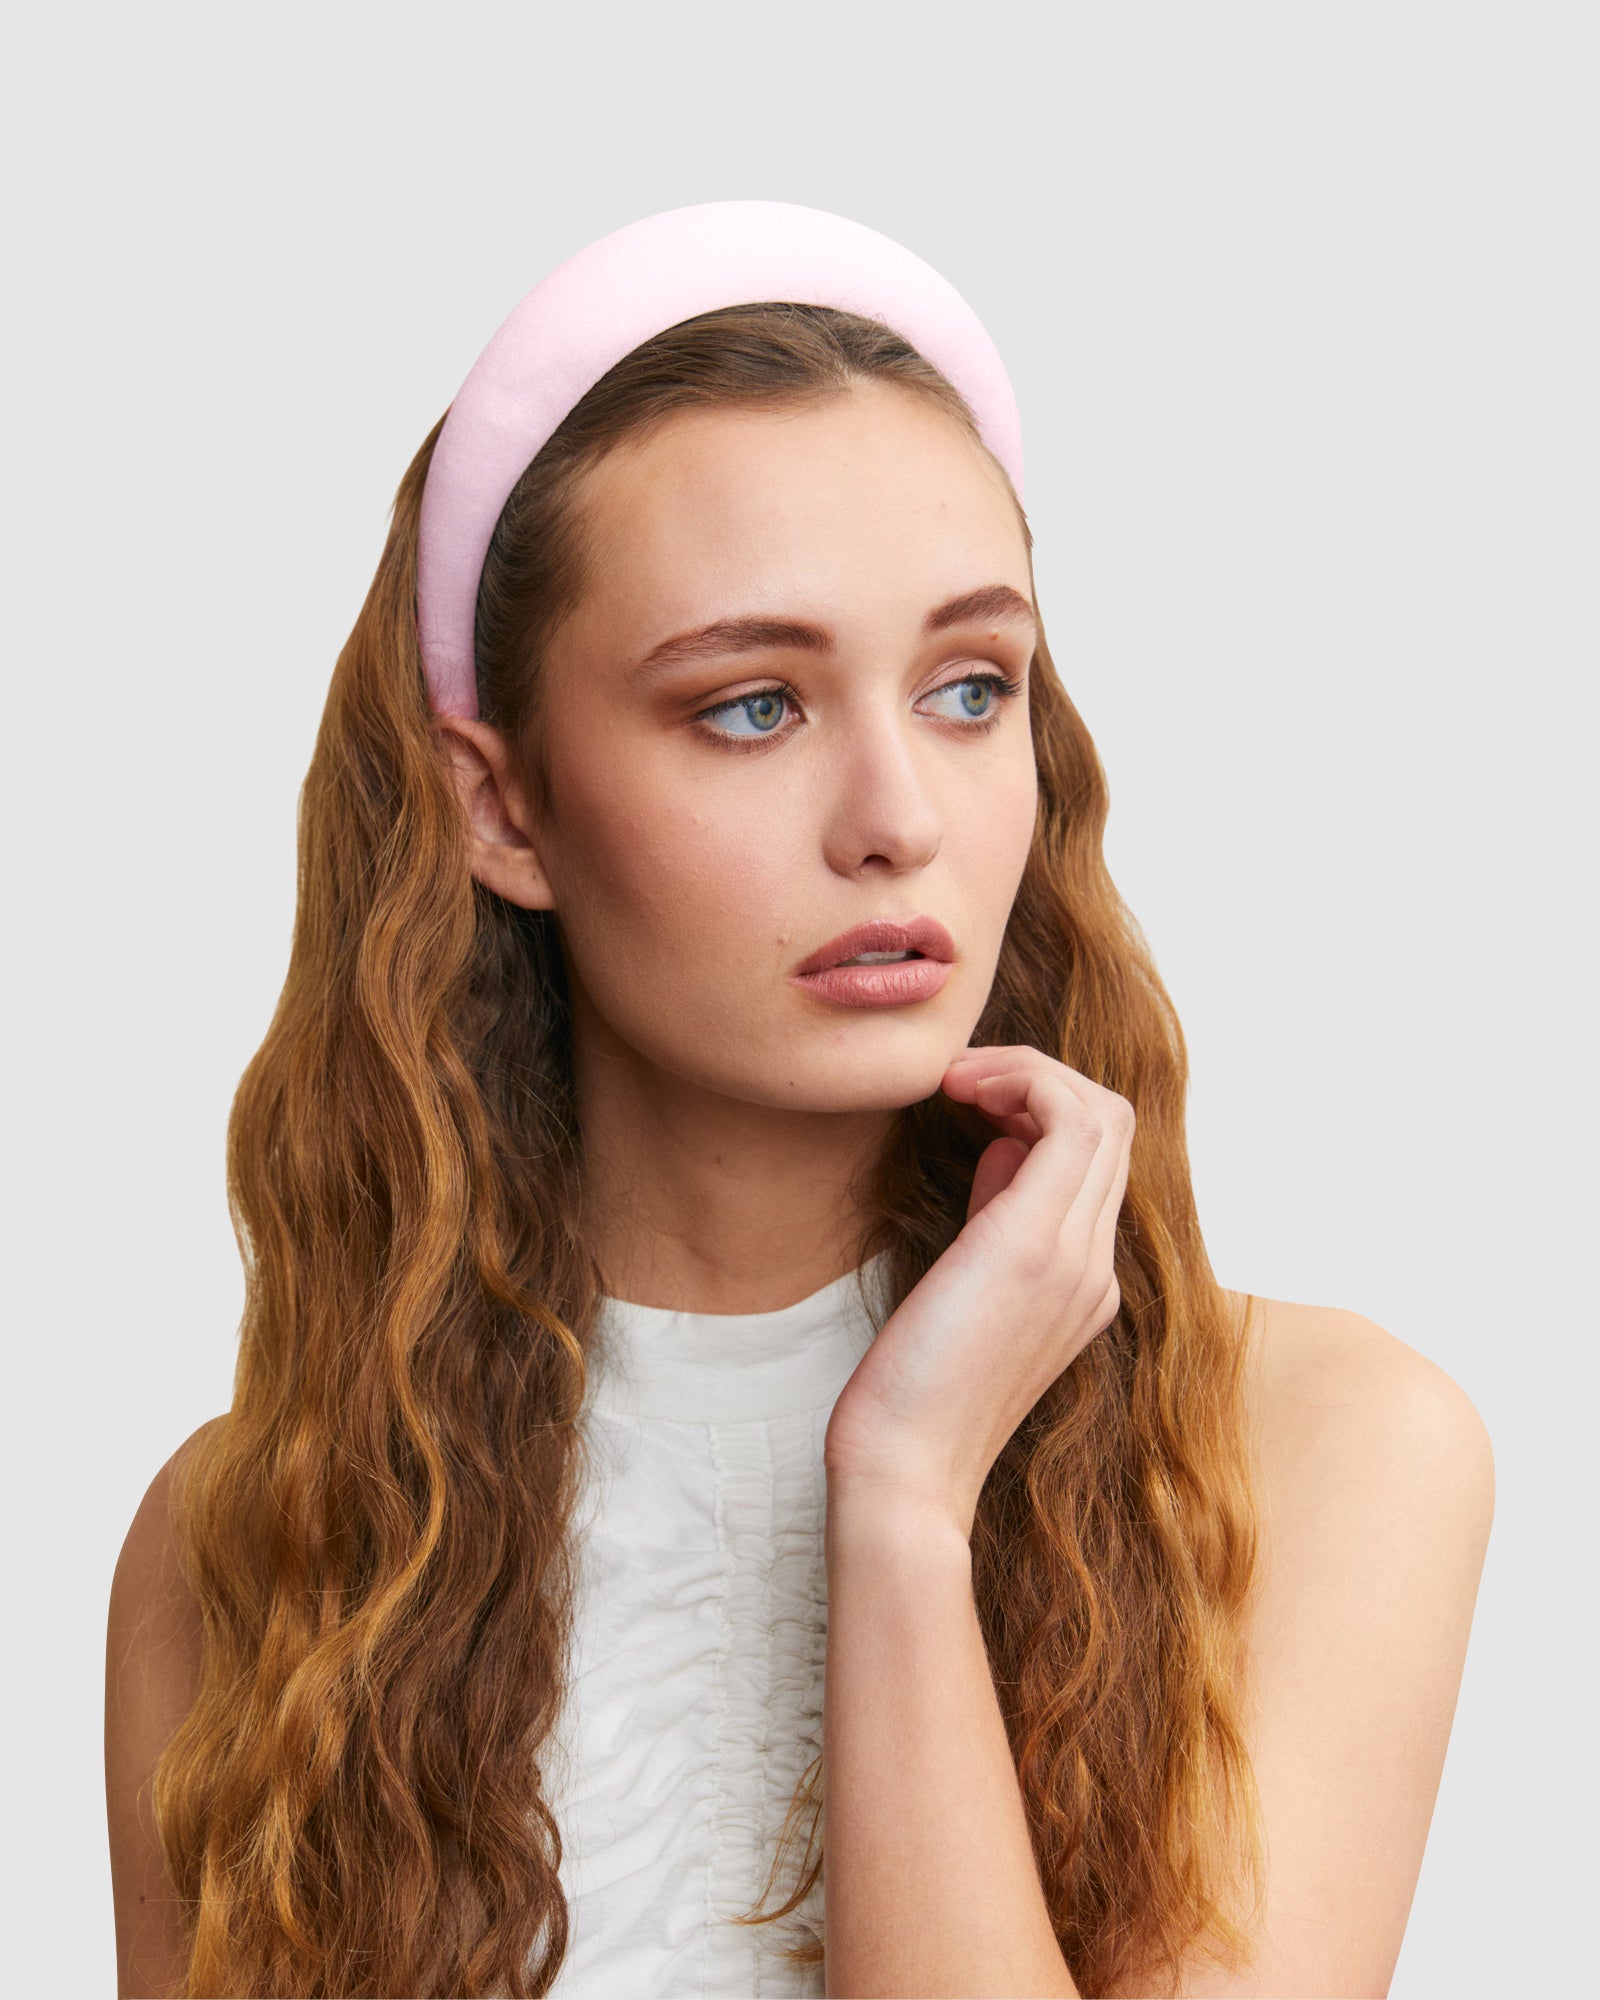 How to Rock the Pink Headband